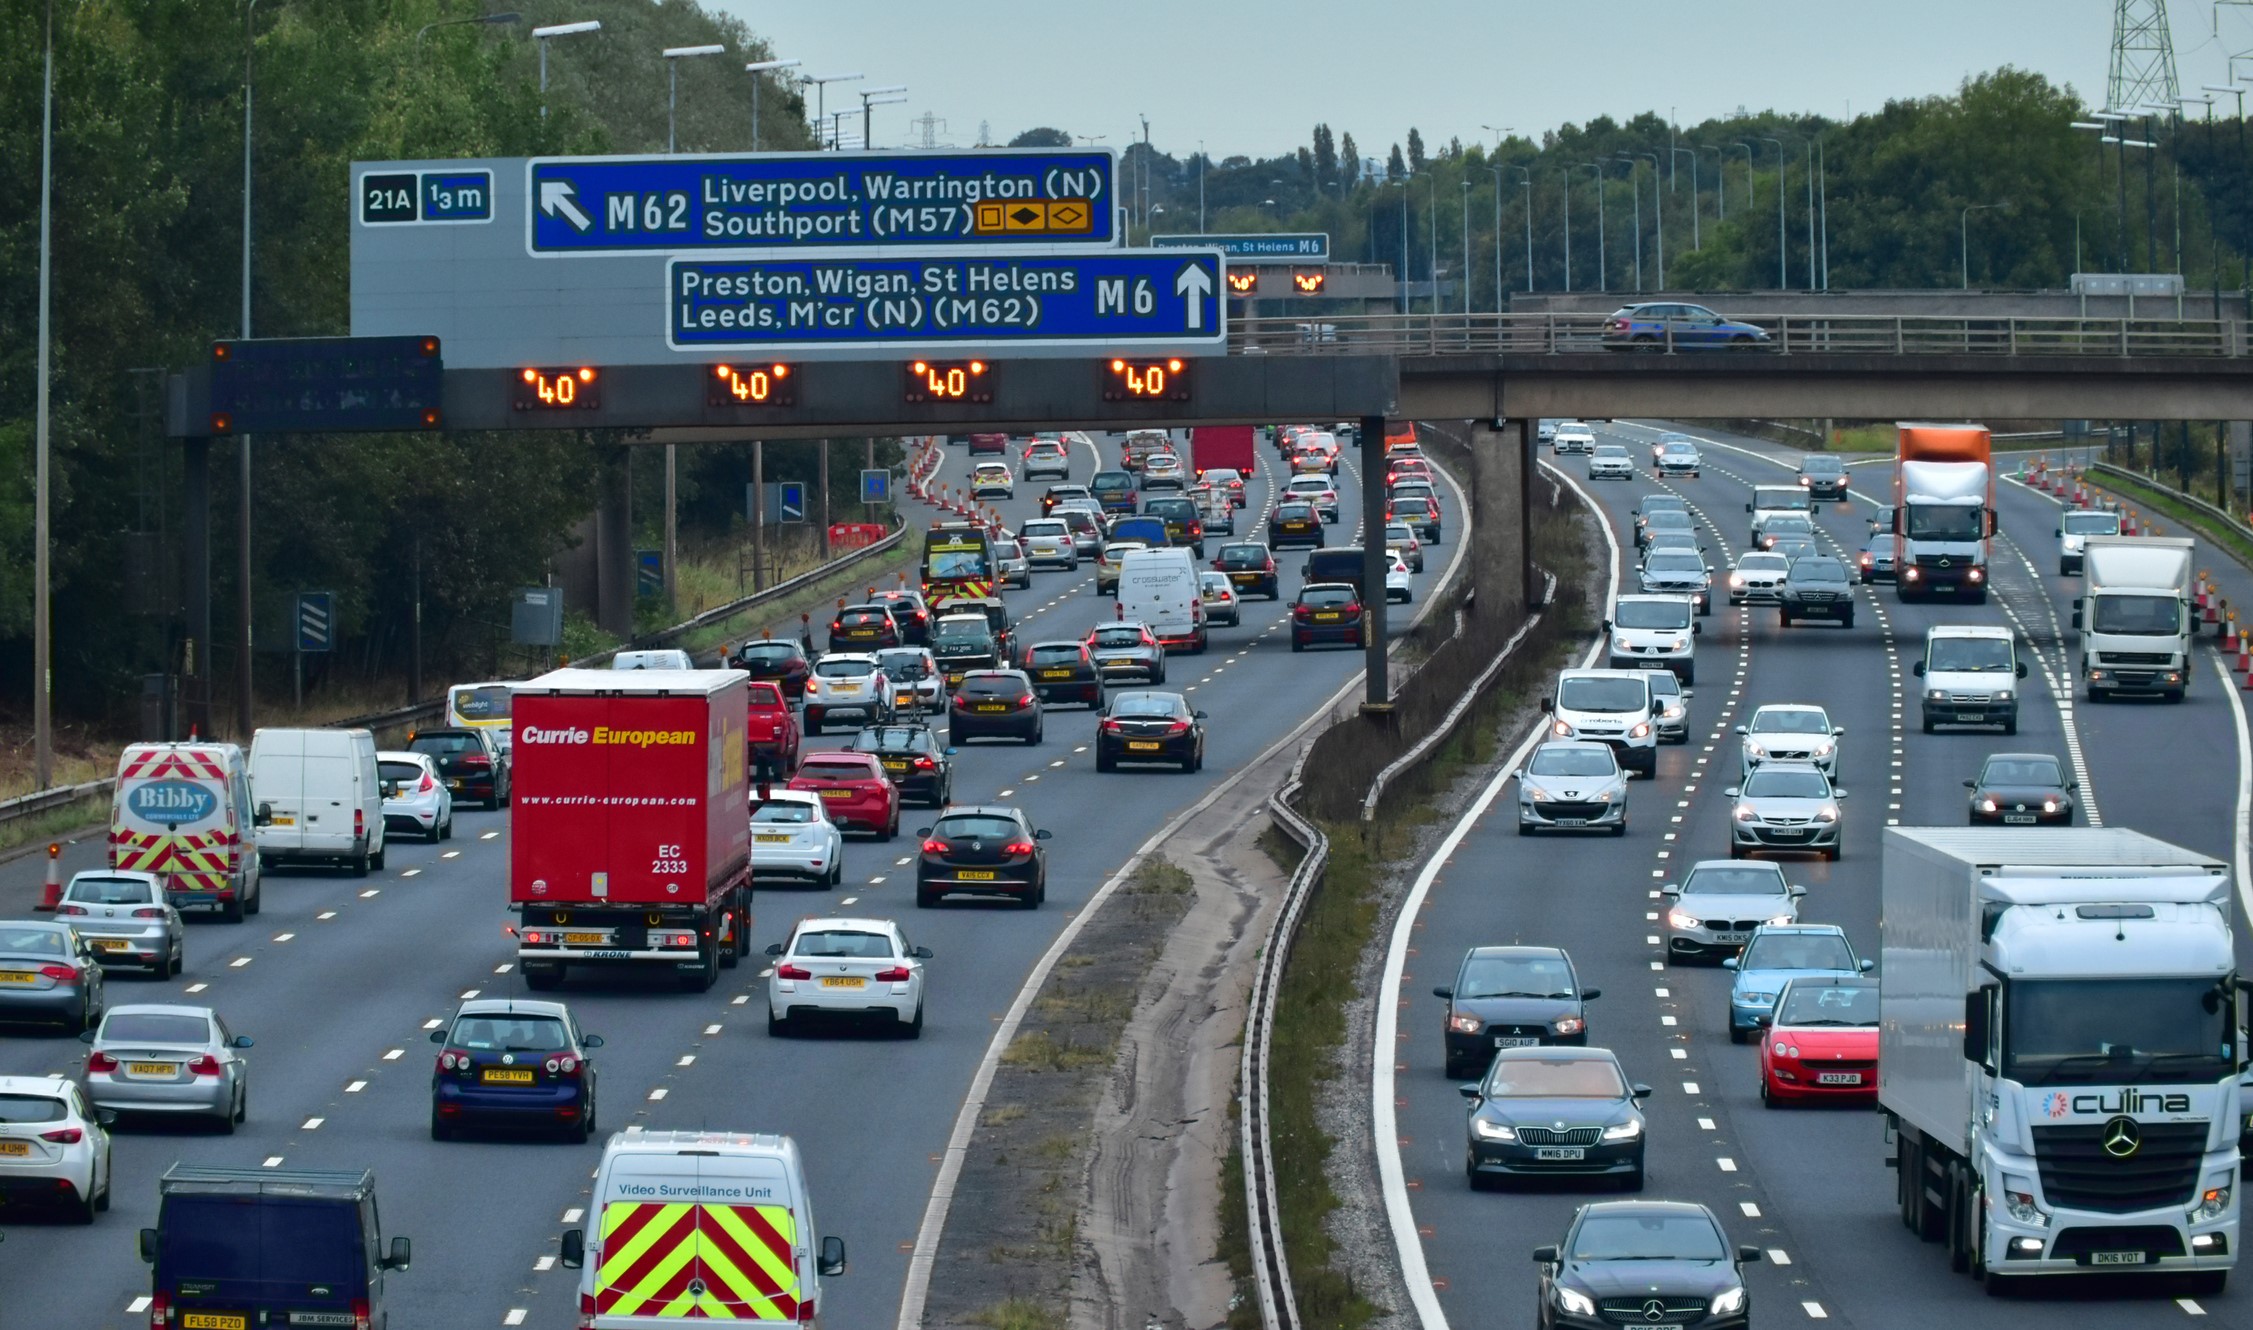 Which UK Road Experiences the Most Disruptions?